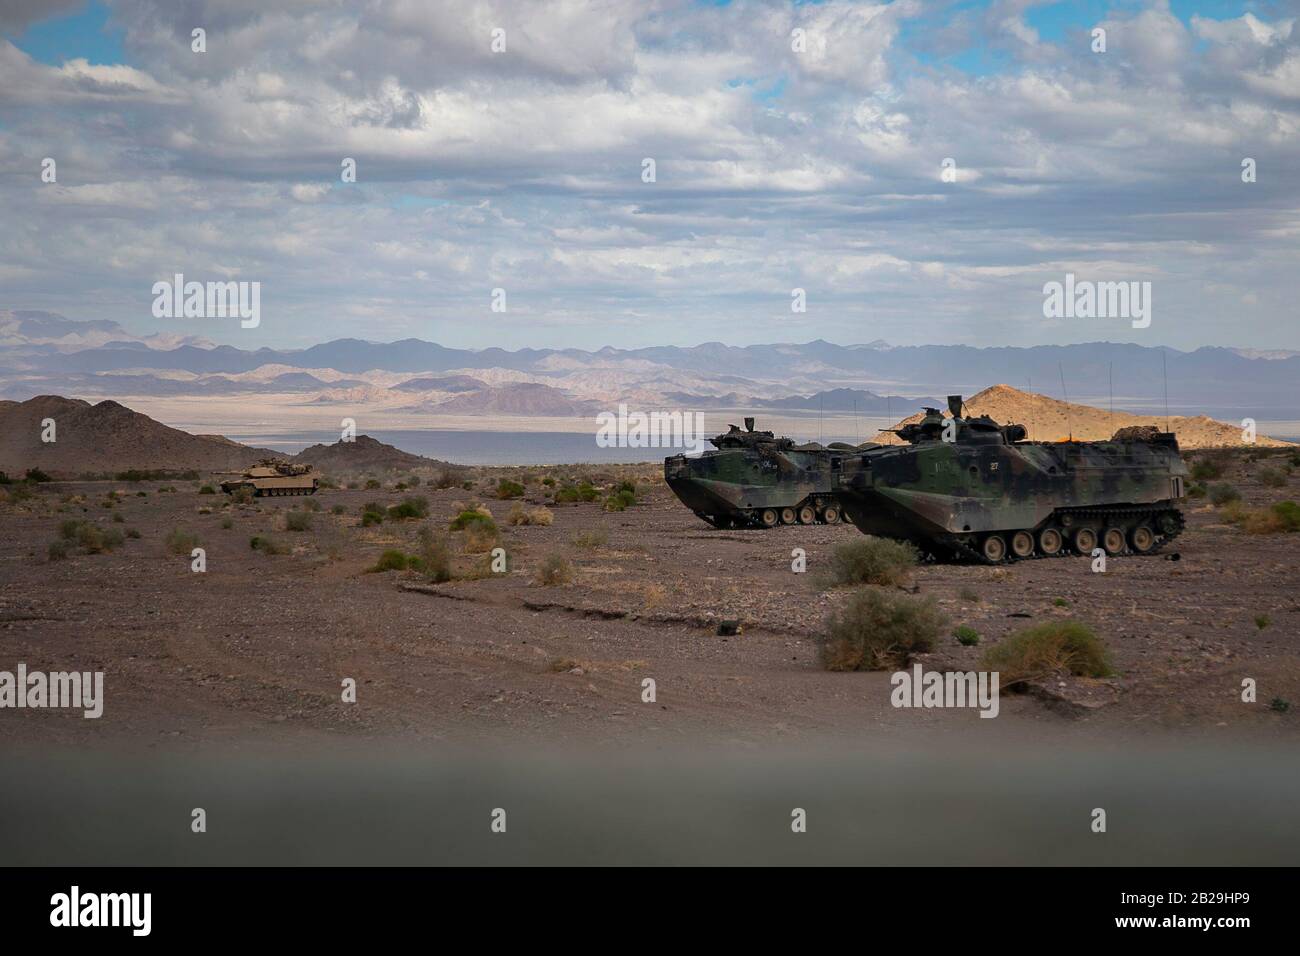 U.S. Marine Corps vehicles attached to various units, stand by during a Regimental Assault Course (RAC), Marine Air Ground Combat Center, Twentynine Palms, California, Feb. 11, 2020. Marines with 1st Battalion, 3rd Marine Regiment participating in integrated training exercise (ITX) 2-20, conducted a Marine Corps Combat Readiness Evaluation (MCREE), along with various other training events to prepare Marines for deployment. (U.S. Marine Corps photo by Lance Cpl. Jose Angeles) Stock Photo